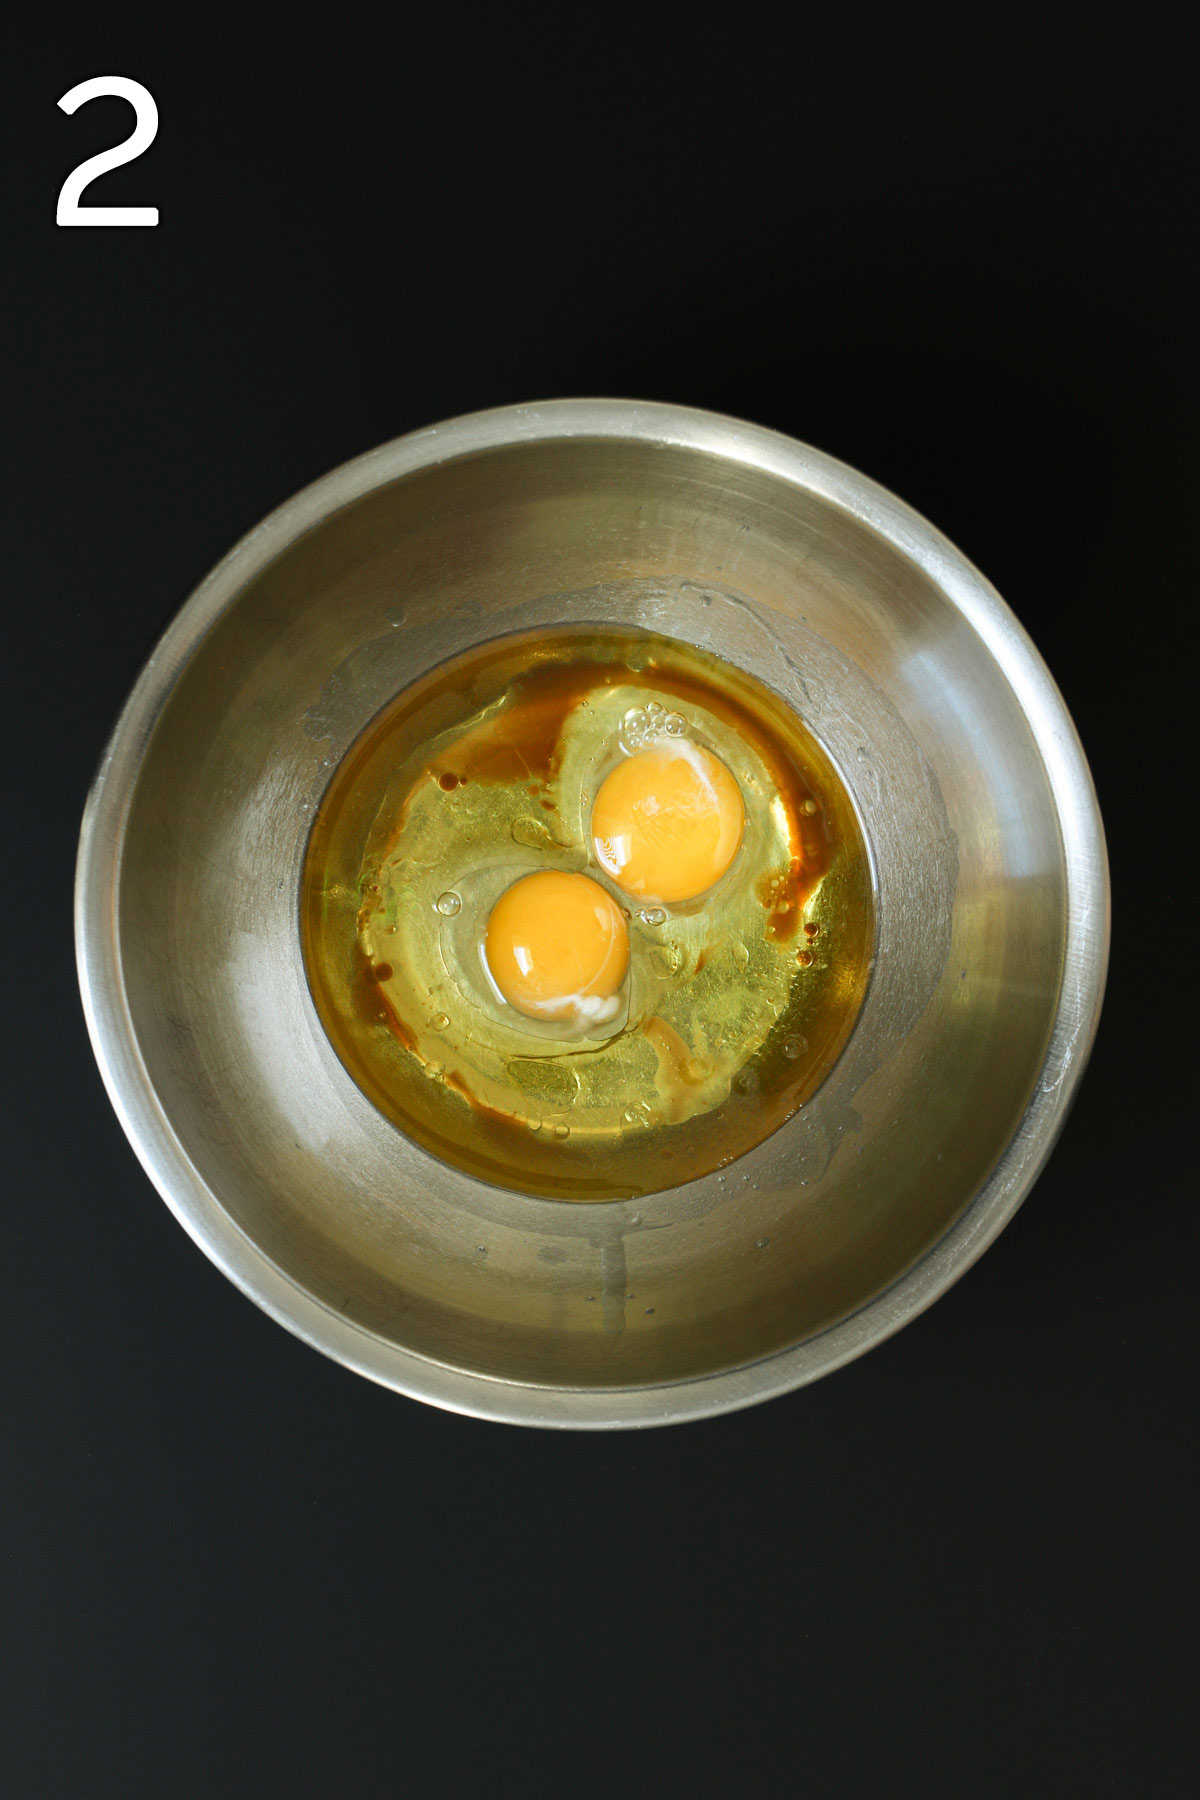 eggs, oil, and extracts in mixing bowl.